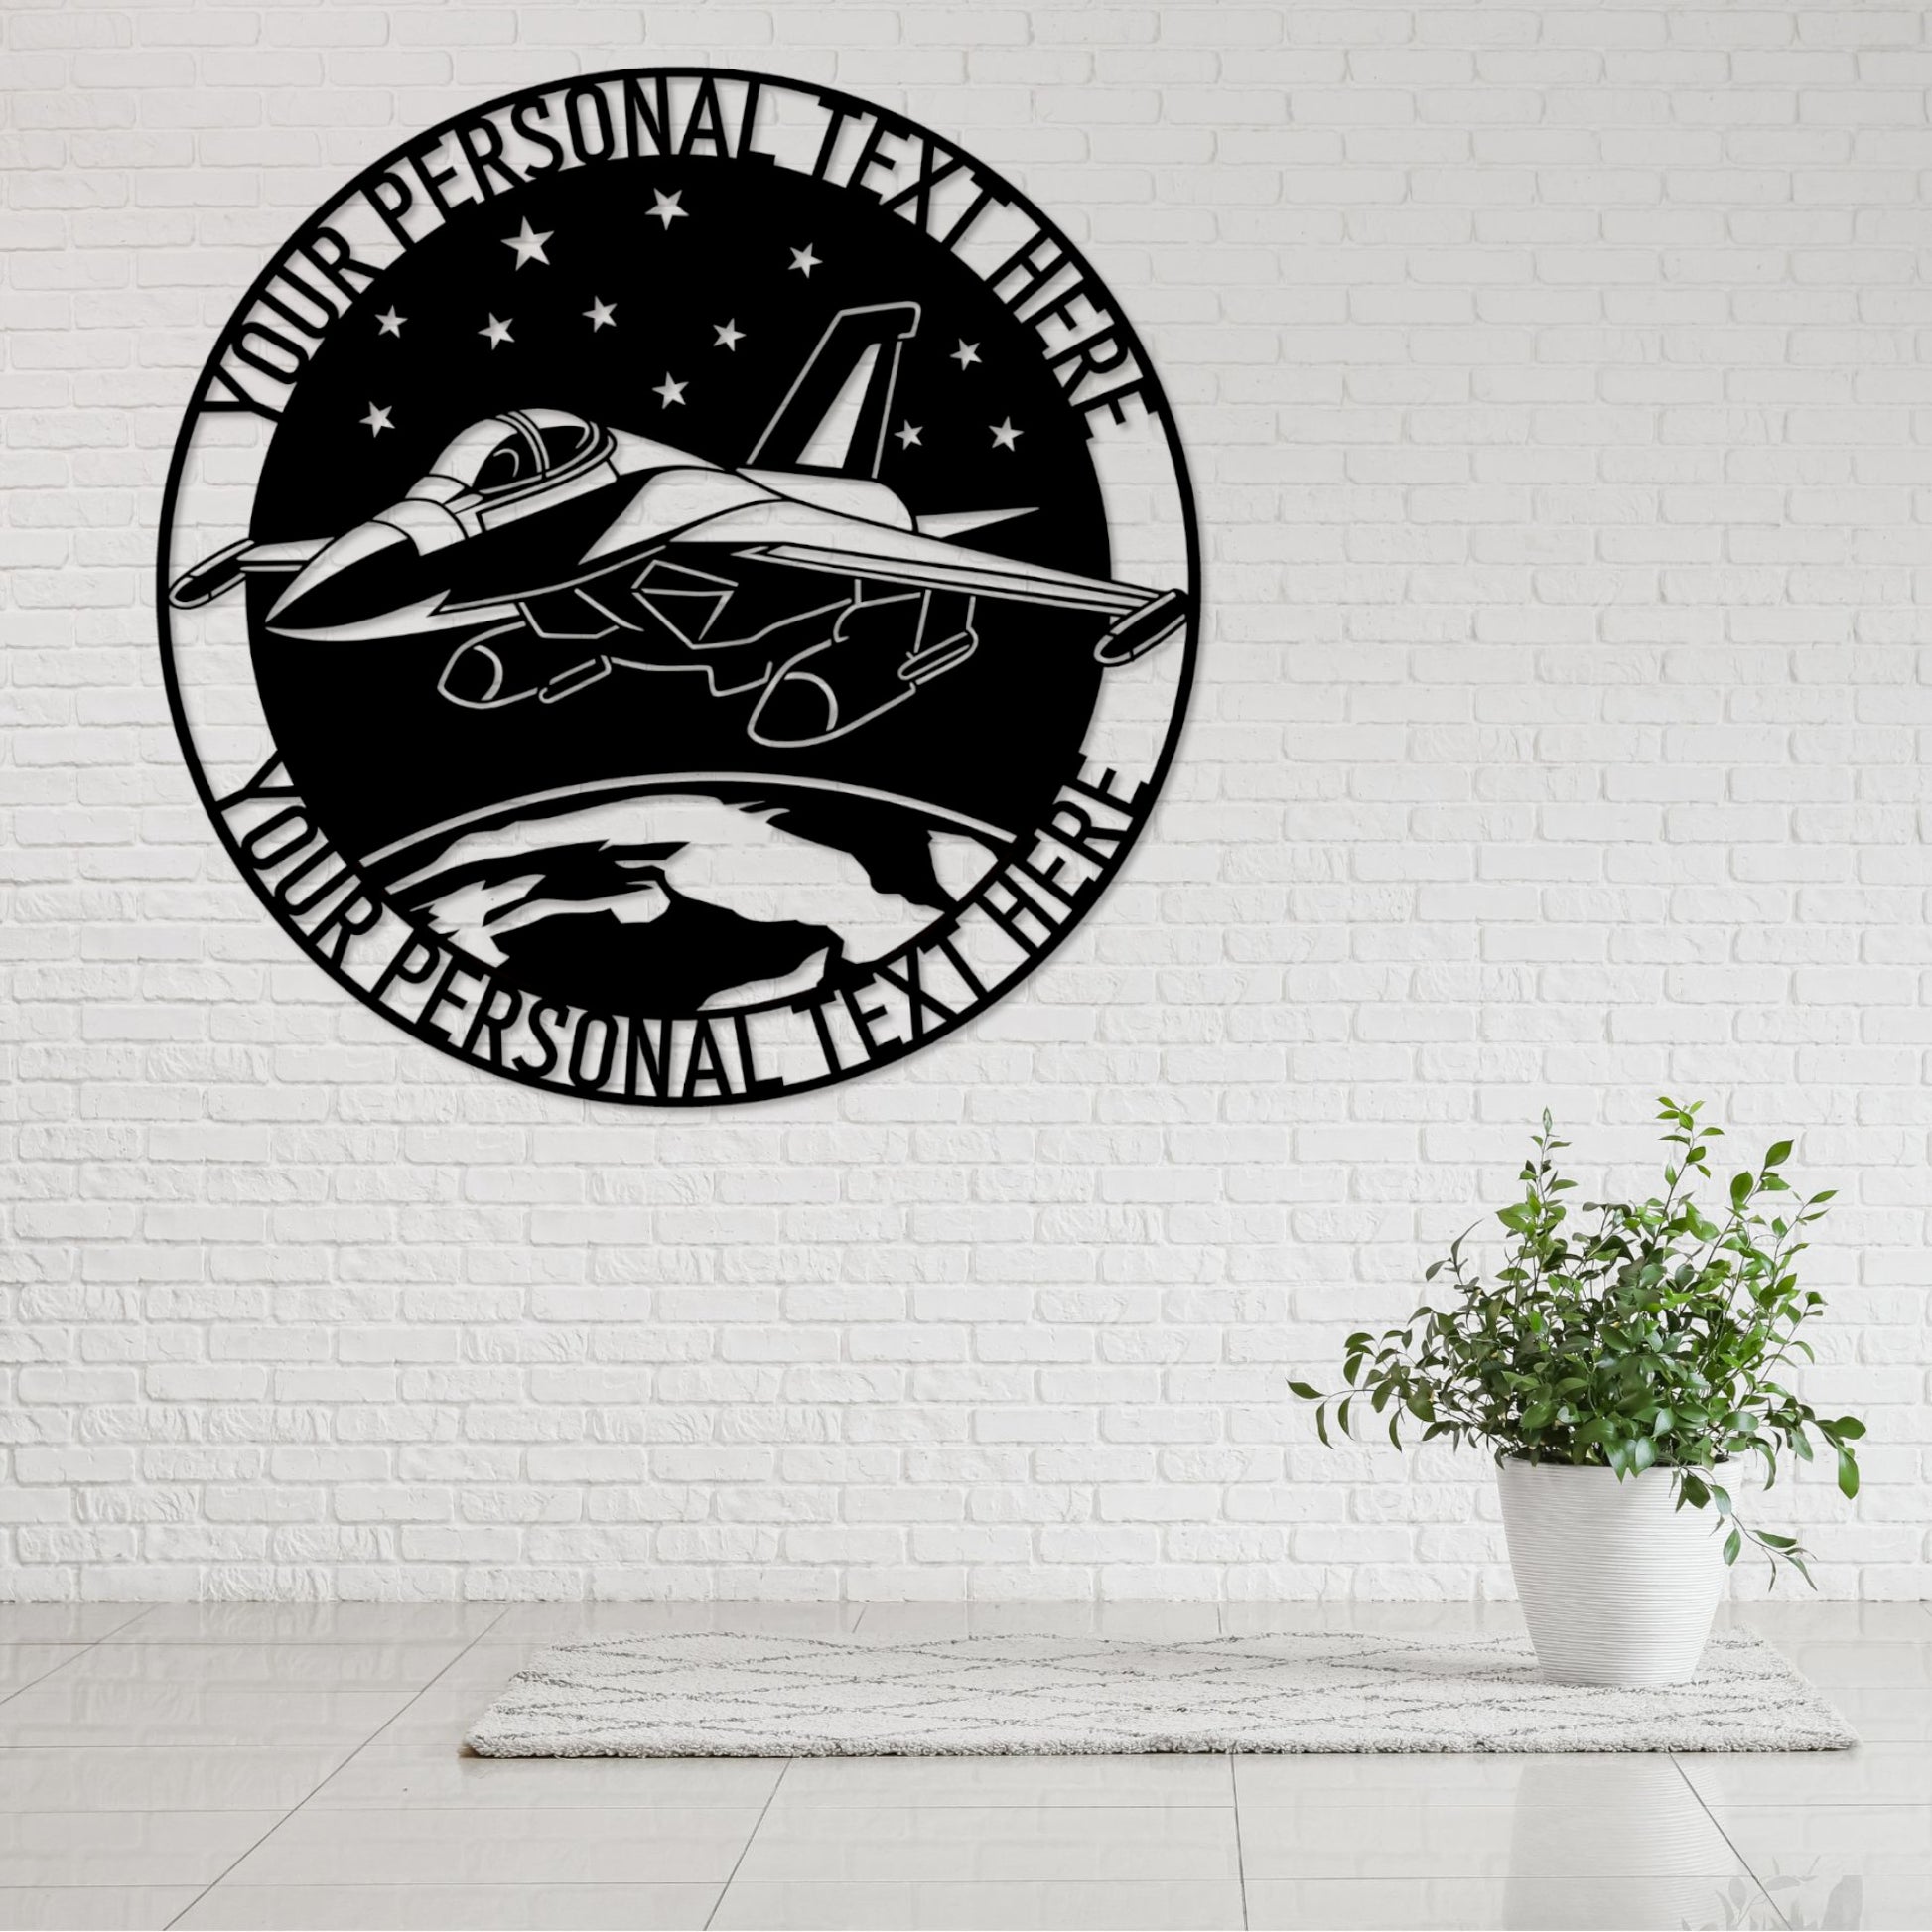 Personalized Fighter Pilot Metal Sign. Custom Jet Fighter Wall Decor Gift. Air Force Wall Hanging. Army Veteran Retirement.  Military Decor